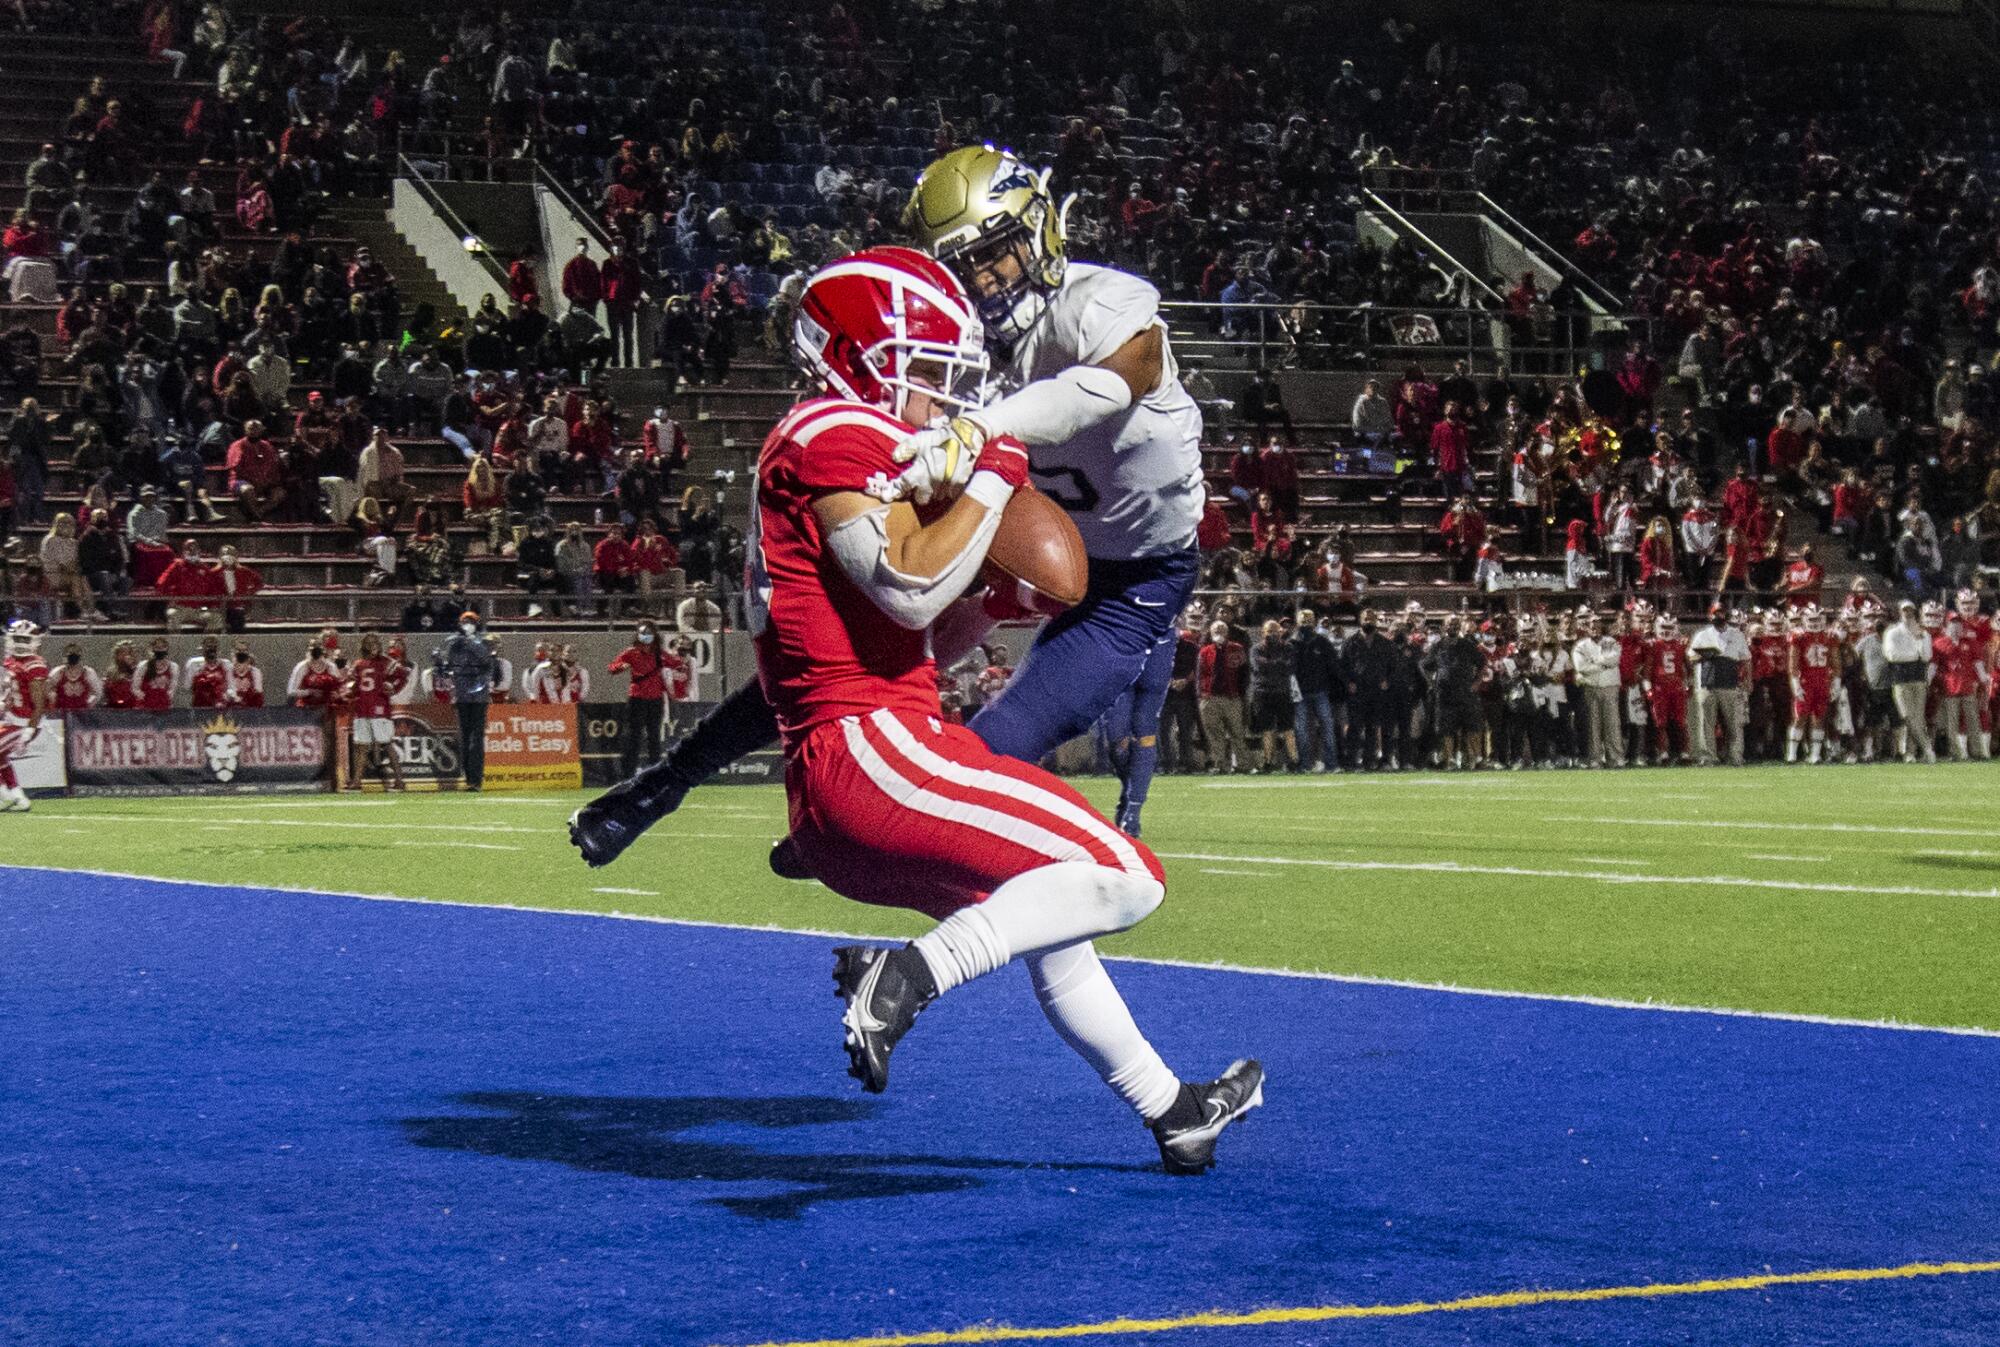 Mater Dei receiver Josiah Zamora hangs on to make a touchdown catch while defended by St. John Bosco's Jaxon Harley.